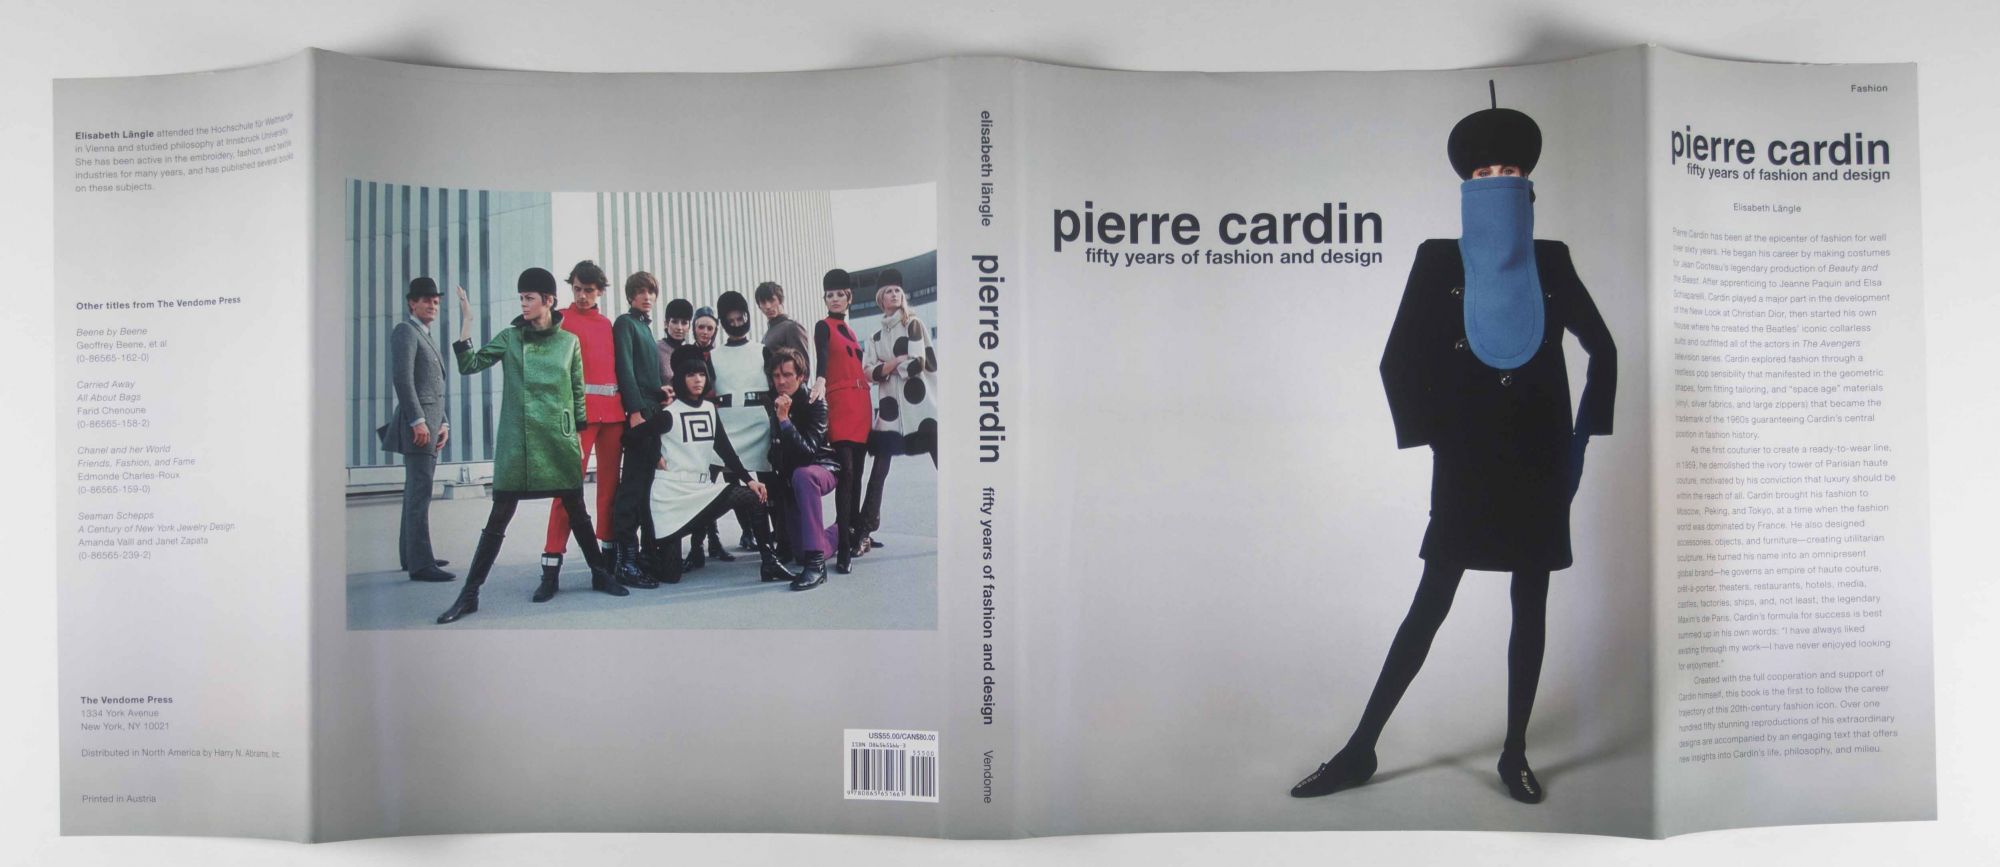 Pierre Cardin. Fifty Years of Fashion and Design by Längle, Elisabeth: Near  fine to fine condition Hardcover (2005) First American edition.